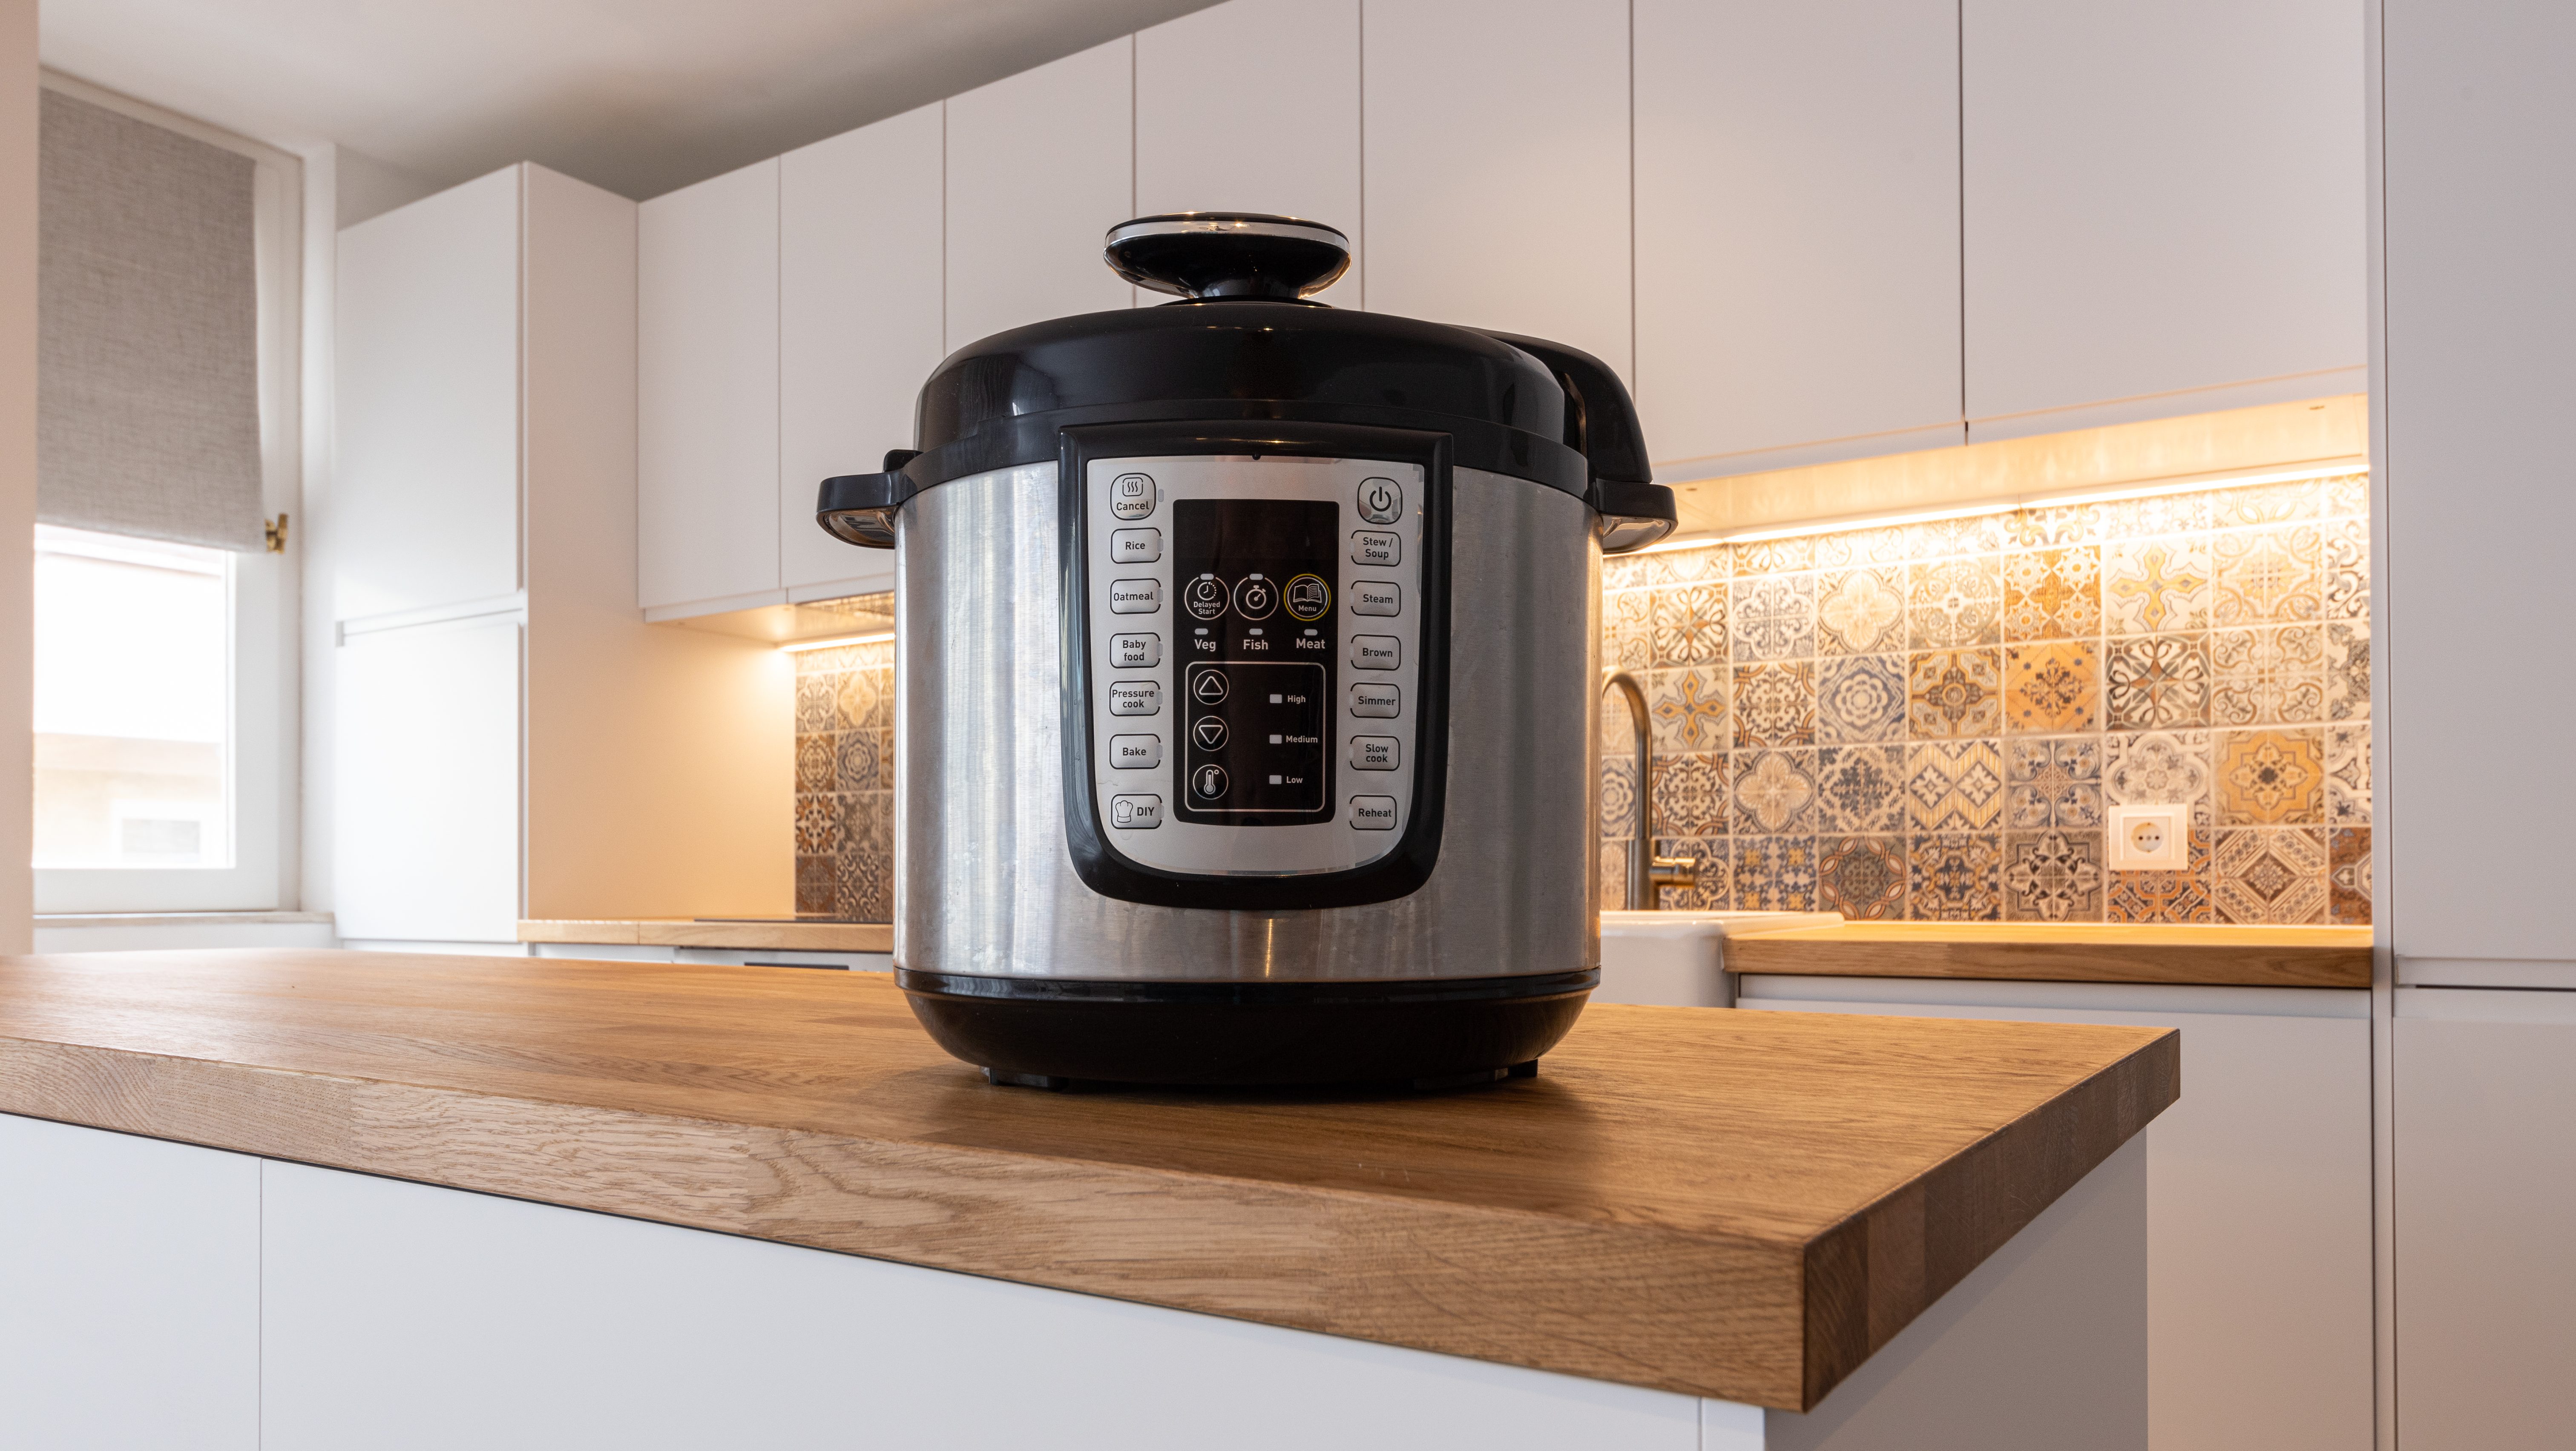 Why did the Instant Pot go out of style? - Marketplace